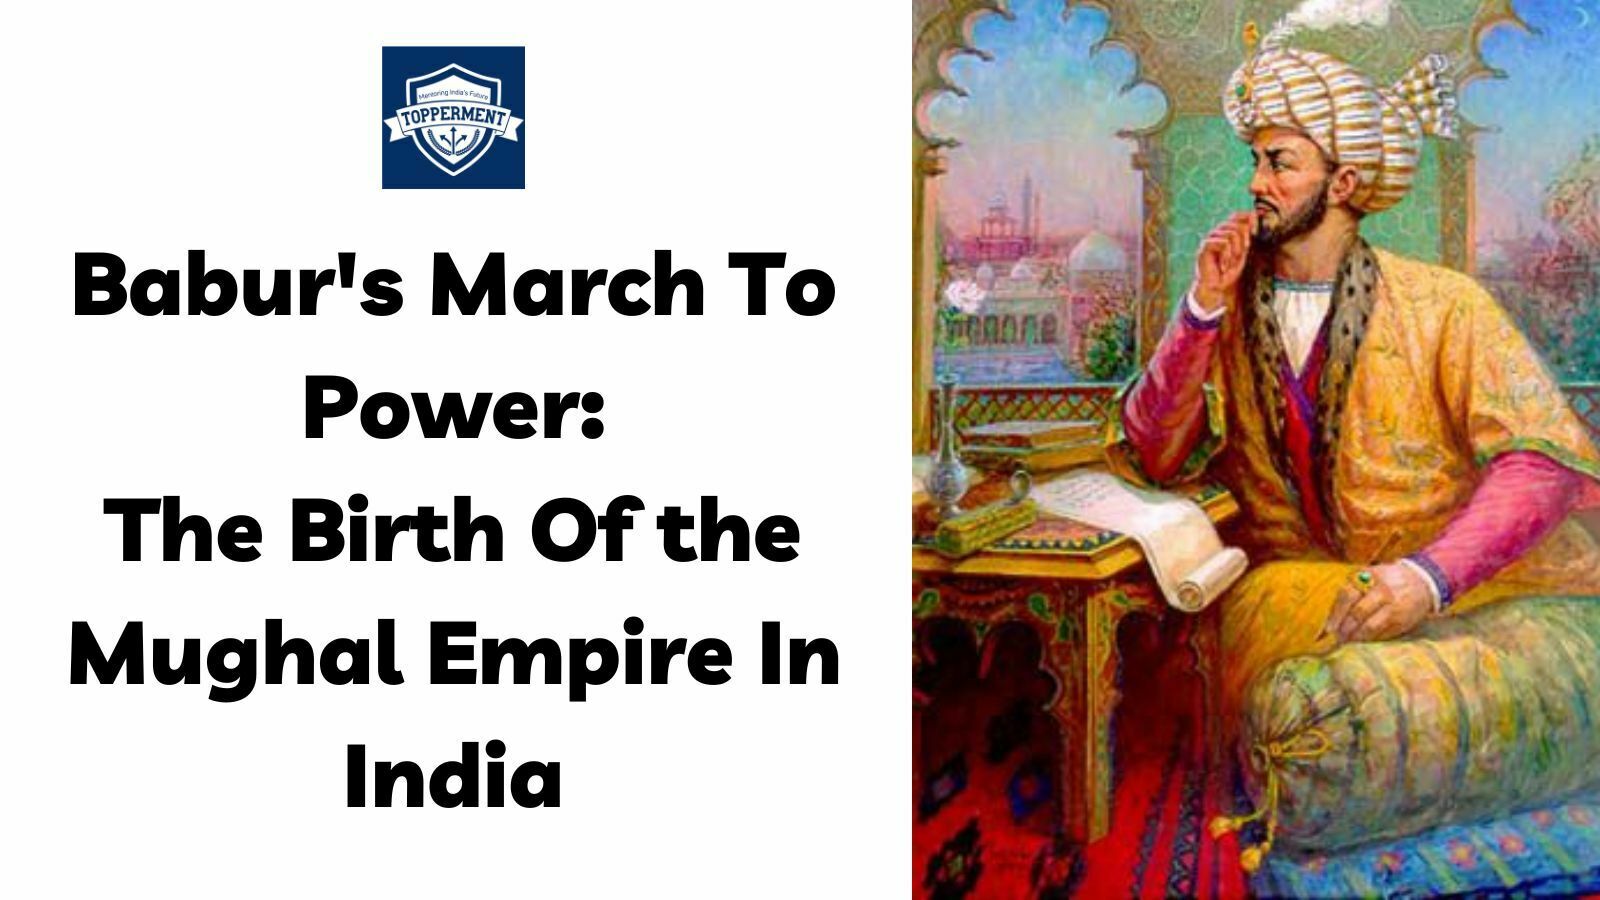 Babur’s March To Power: Birth Of The Mughal Empire In India- Topperment